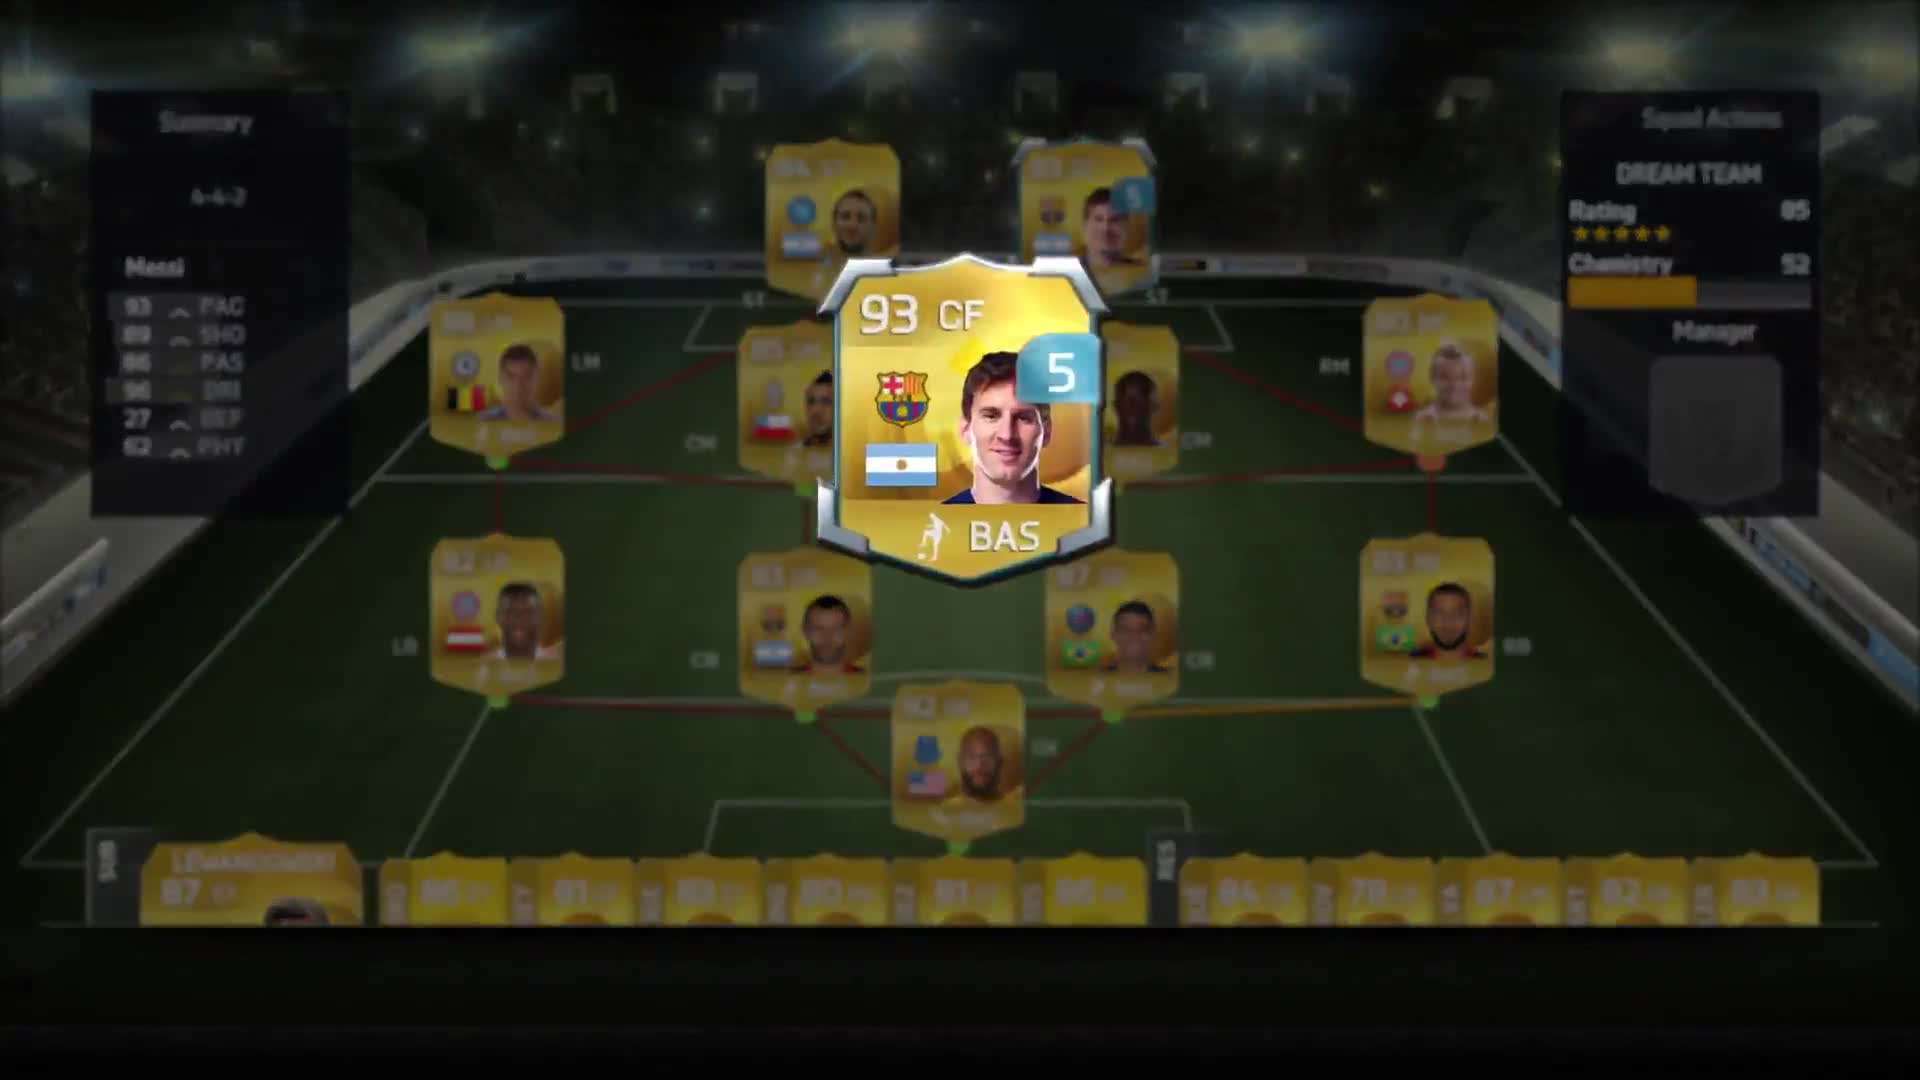 FIFA 15 Ultimate Team - New Features